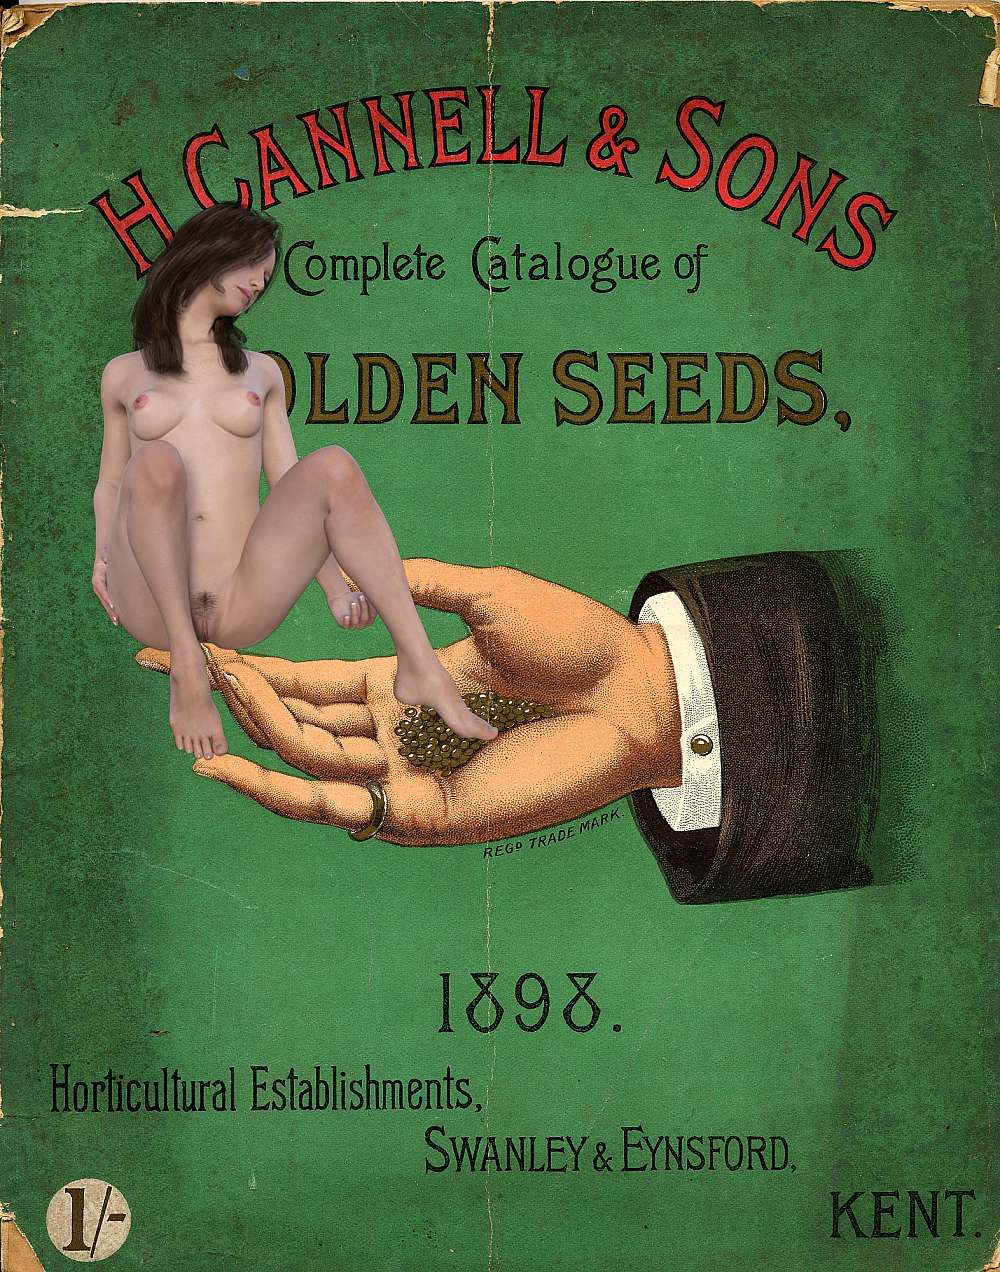 Naked woman on a seeds cataglogue cover